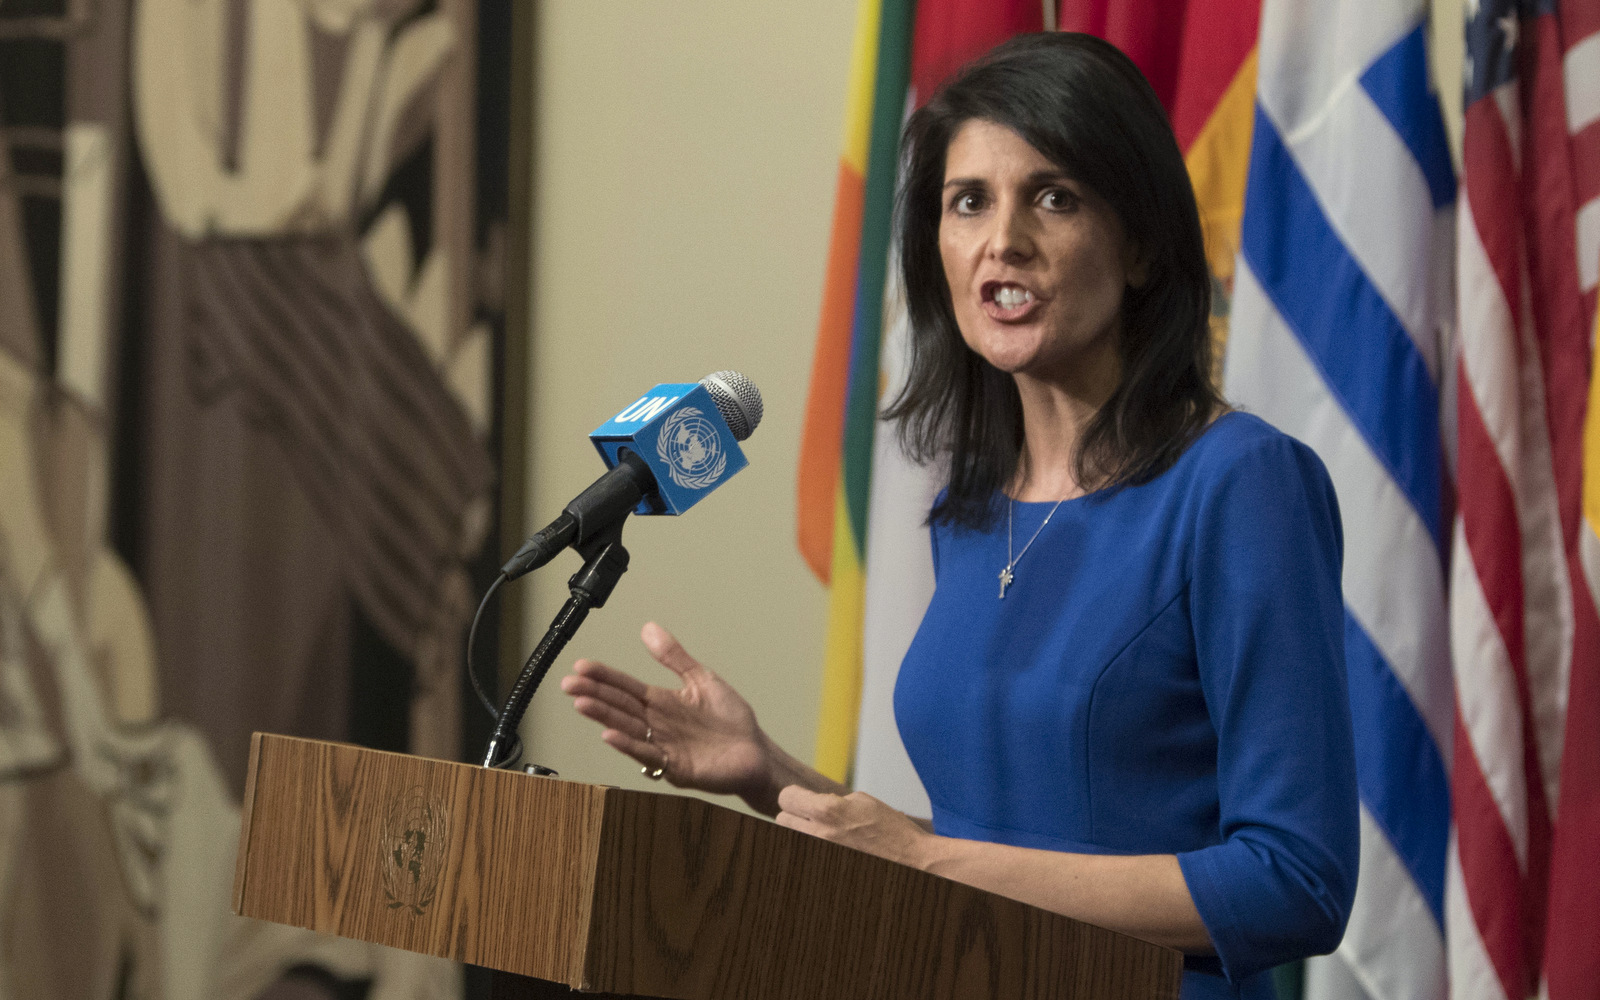 United States Ambassador to the United Nations Nikki Haley speaks to reporters after a Security Council meeting on the situation in the Middle East, Thursday, Feb. 16, 2017 at U.N. headquarters. (AP/Mary Altaffer)